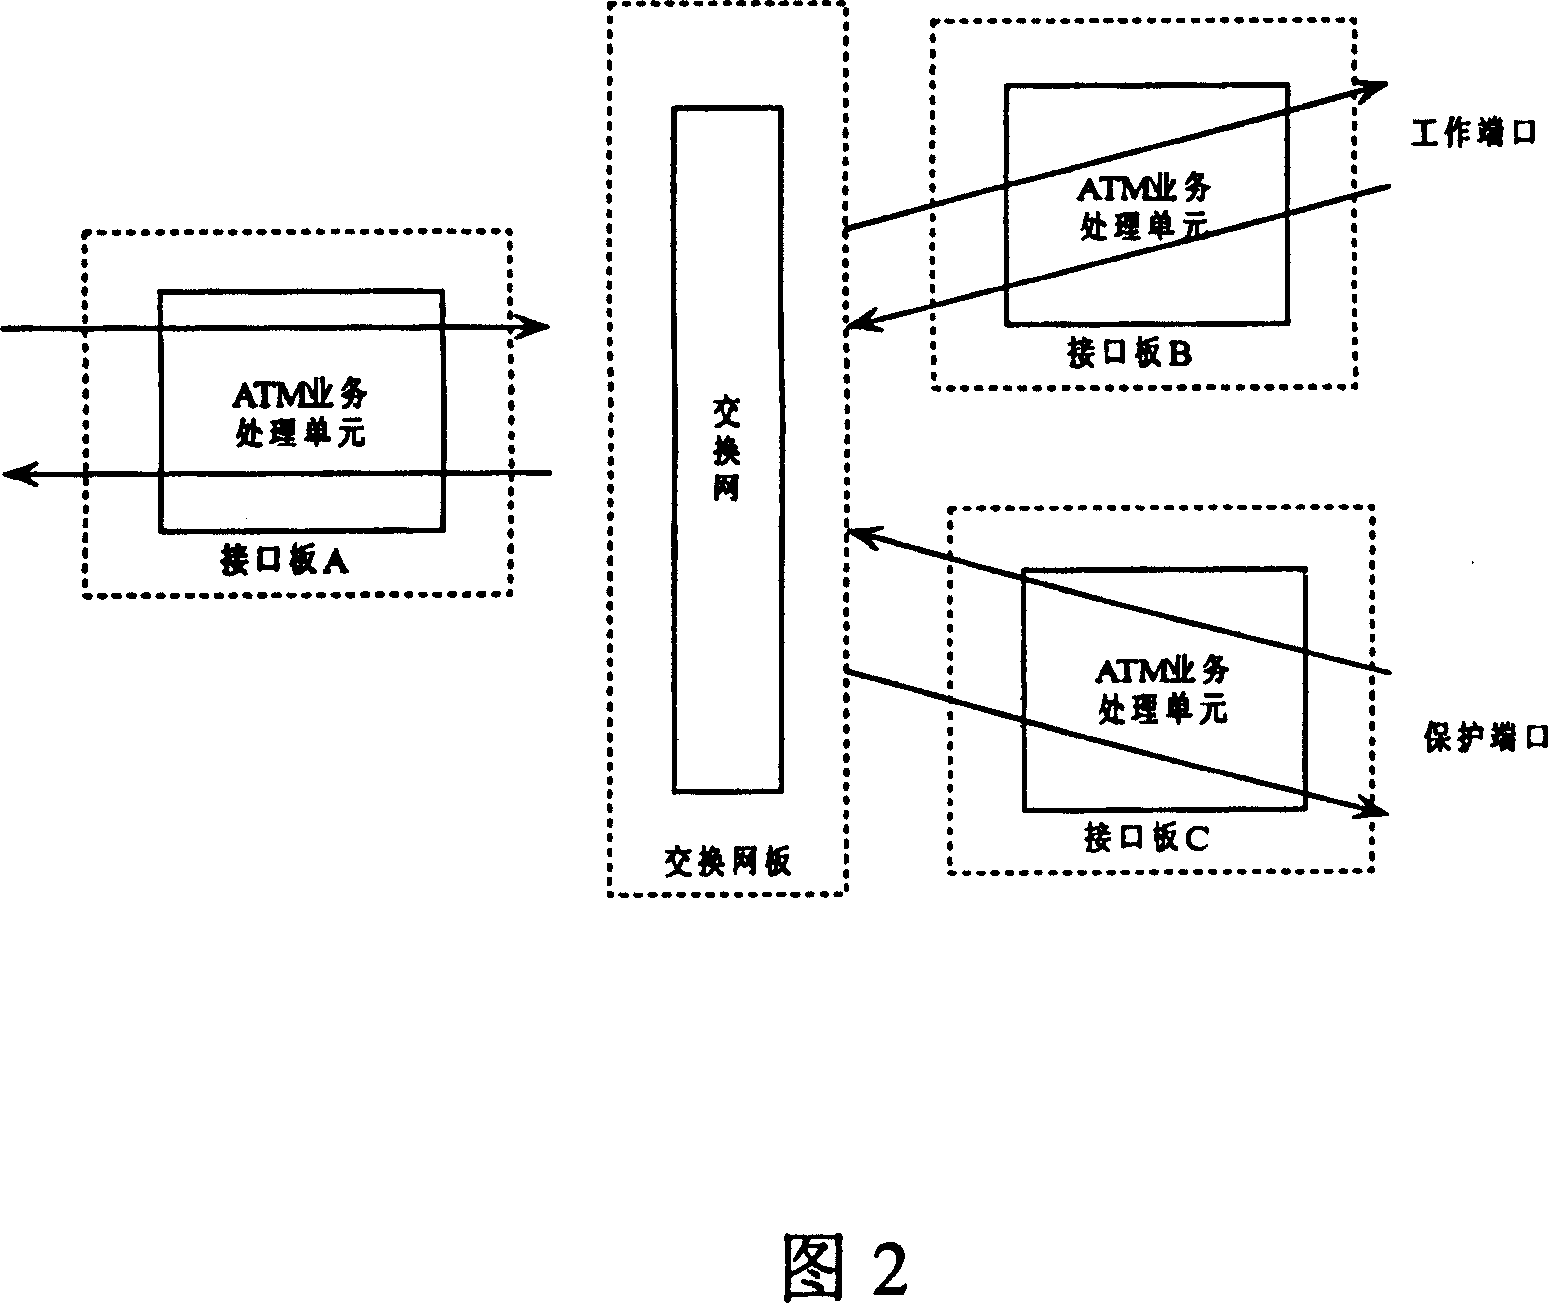 A method of service backup in asynchronous transmission mode group network